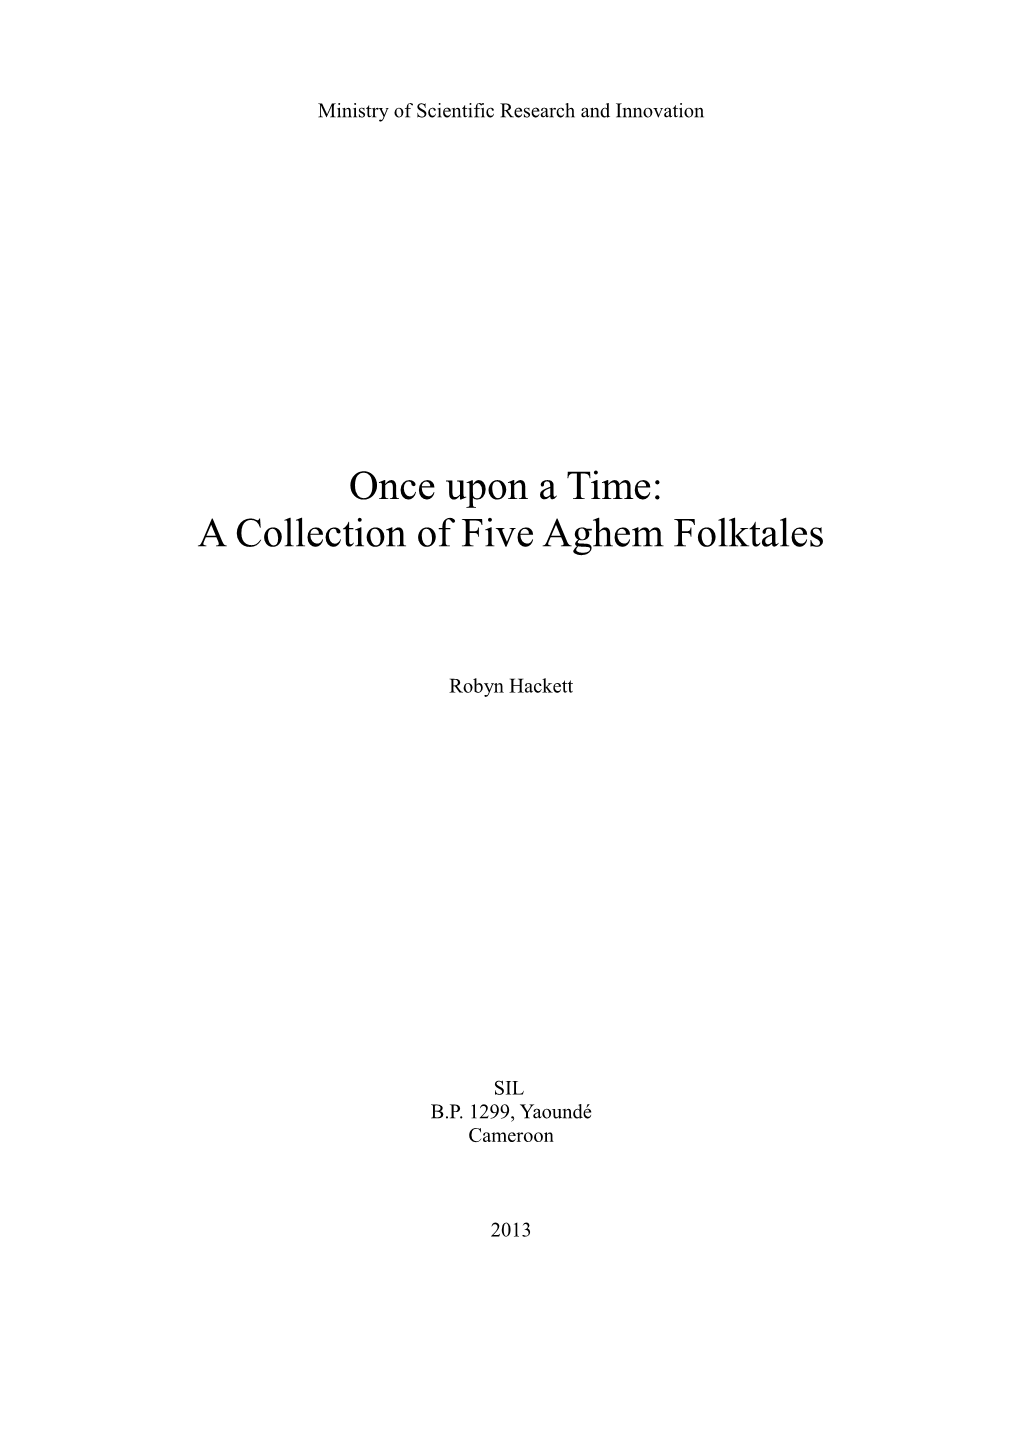 A Collection of Five Aghem Folktales